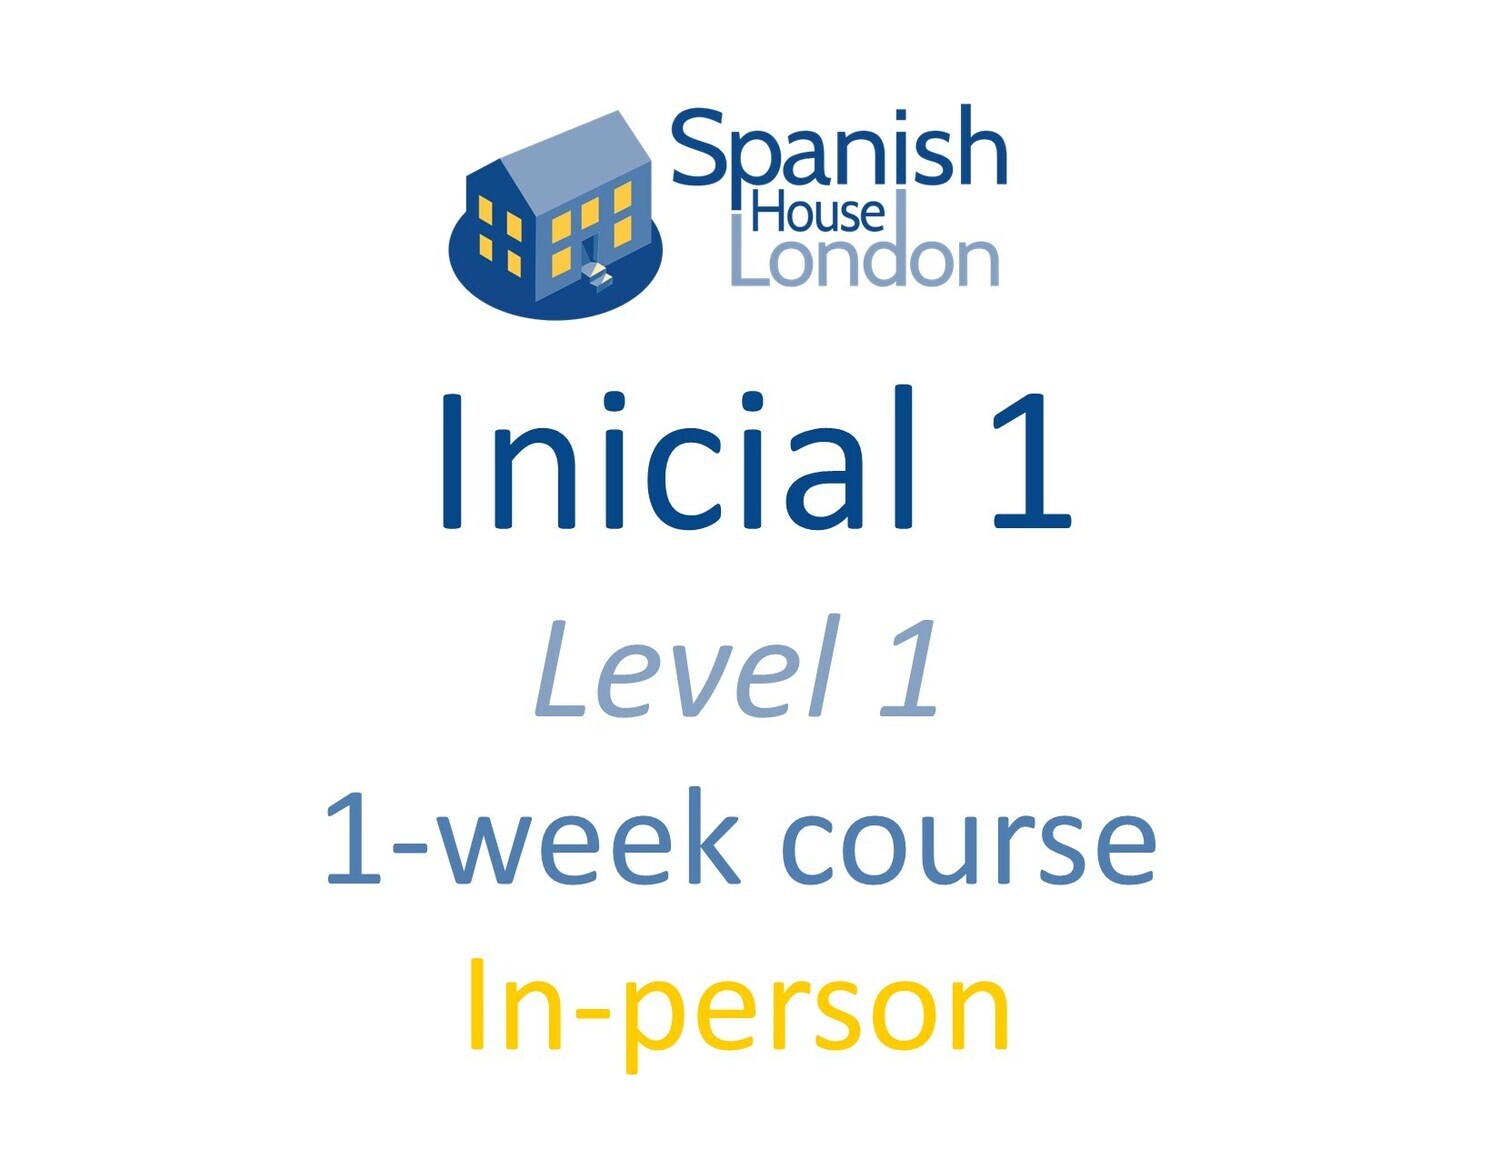 One-Week Intensive Inicial 1 Course starting on 17th April at 10.30am in Clapham North